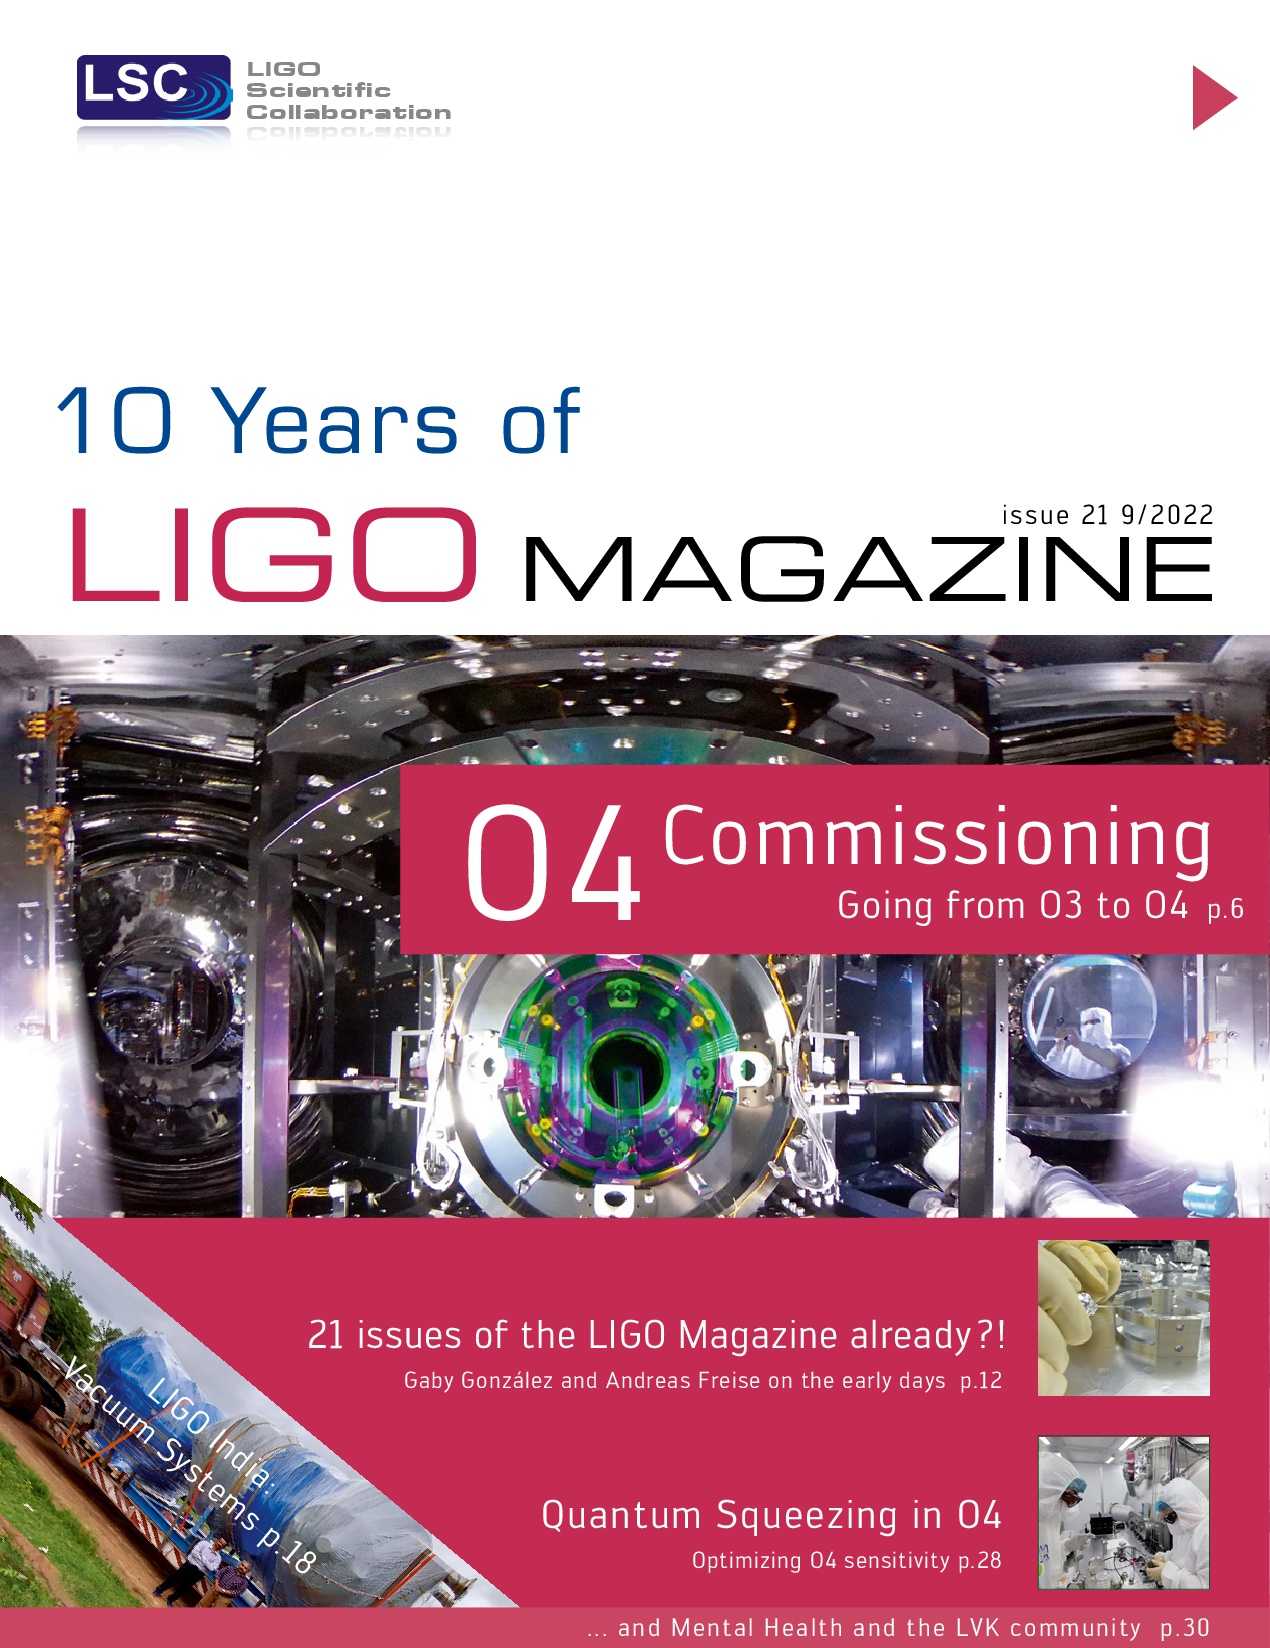 News-Image 3 of: New LIGO Magazine Issue 21 is out